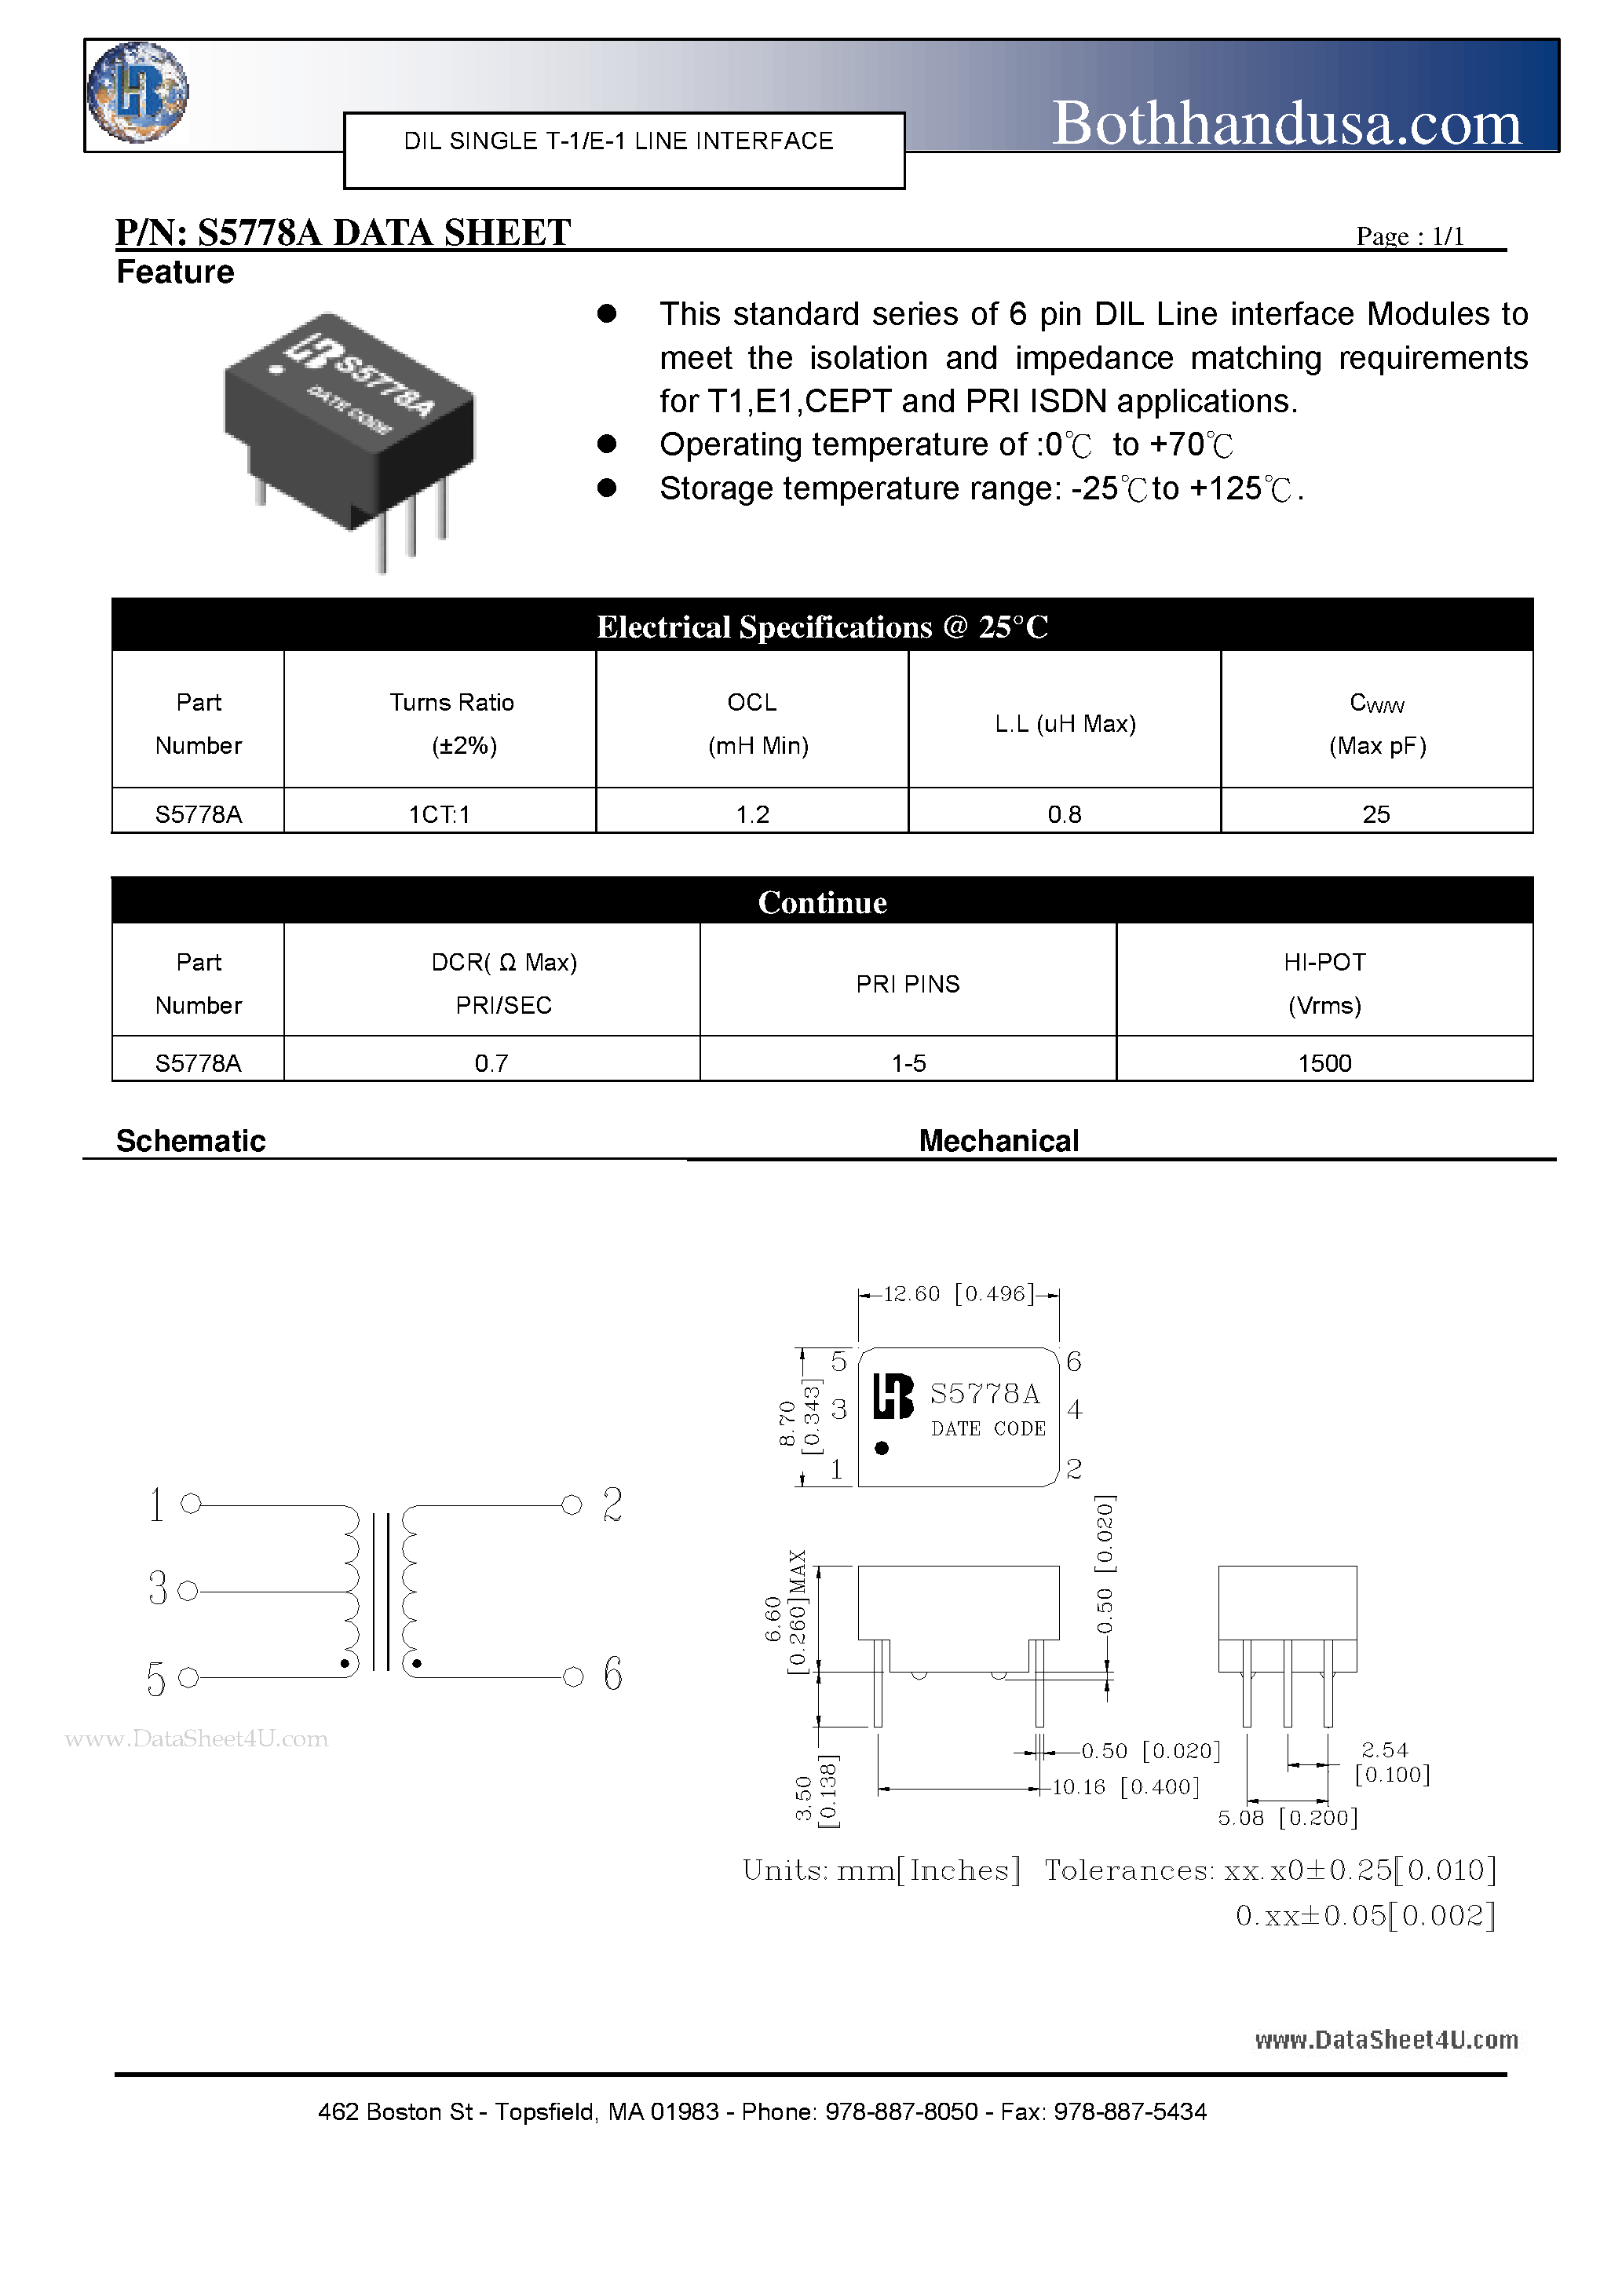 Datasheet S5778A - DIL SINGLE T-1/E-1 LINE INTERFACE page 1